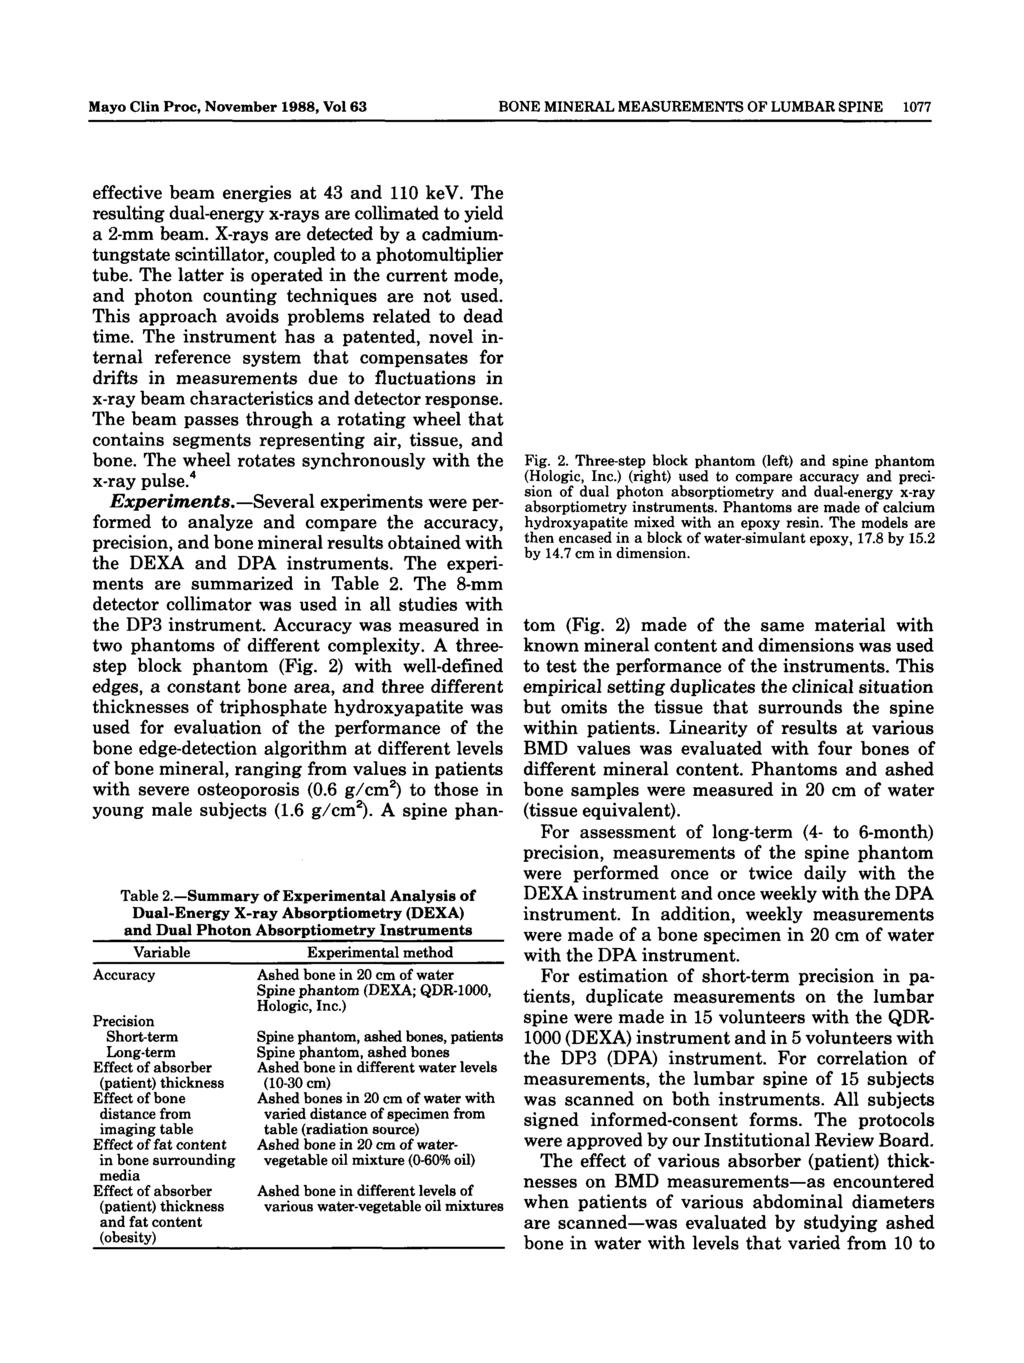 Mayo Clin Proc, November 1988, Vol 63 BONE MNERAL MEASUREMENTS OF LUMBAR SPNE 1077 effective beam energies at 43 and 110 kev. The resulting dual-energy x-rays are collimated to yield a 2-mm beam.